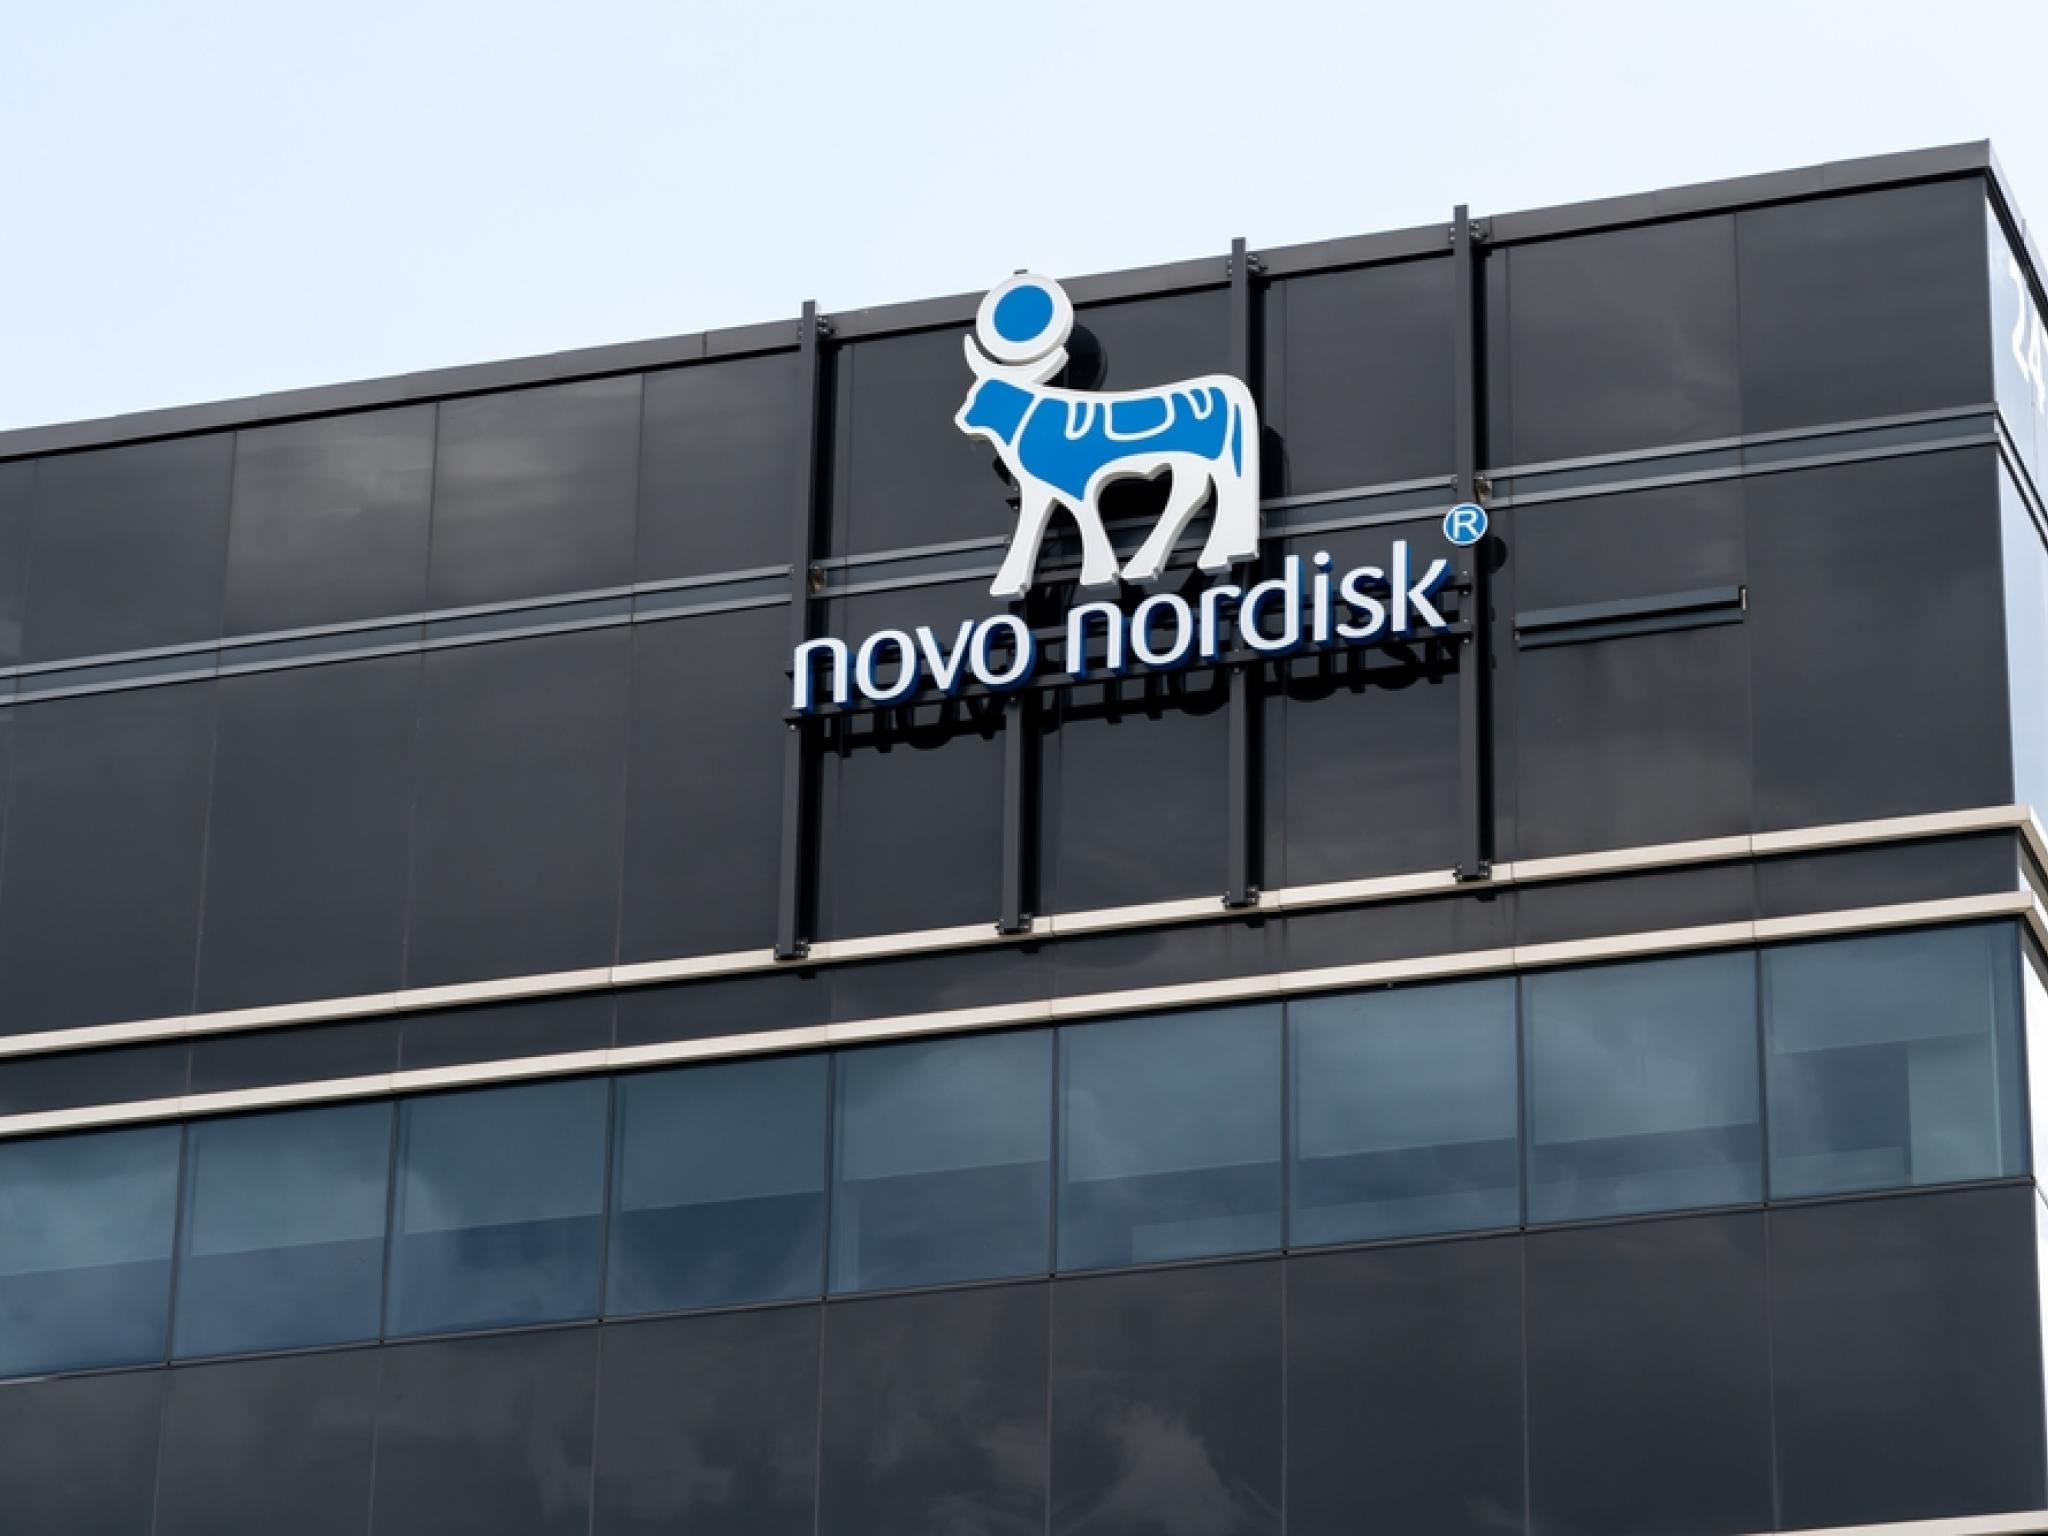  novo-nordisk-halts-late-stage-study-of-experimental-hypertension-drug-takes-over-800m-impairment-charge 